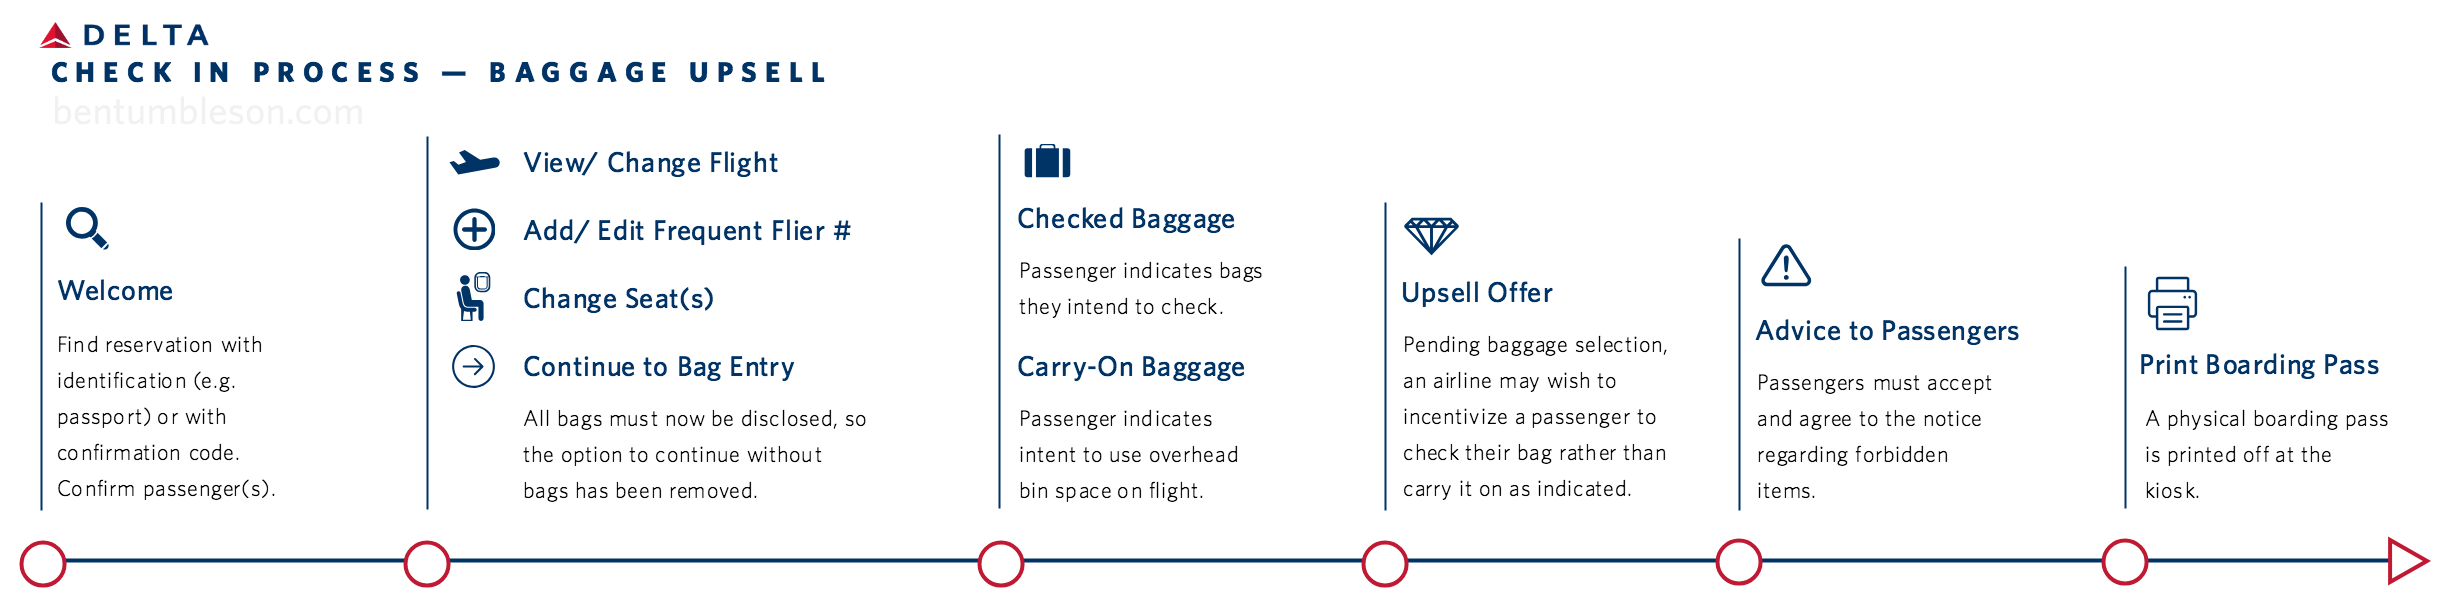 Delta Check-In Process - Upsell